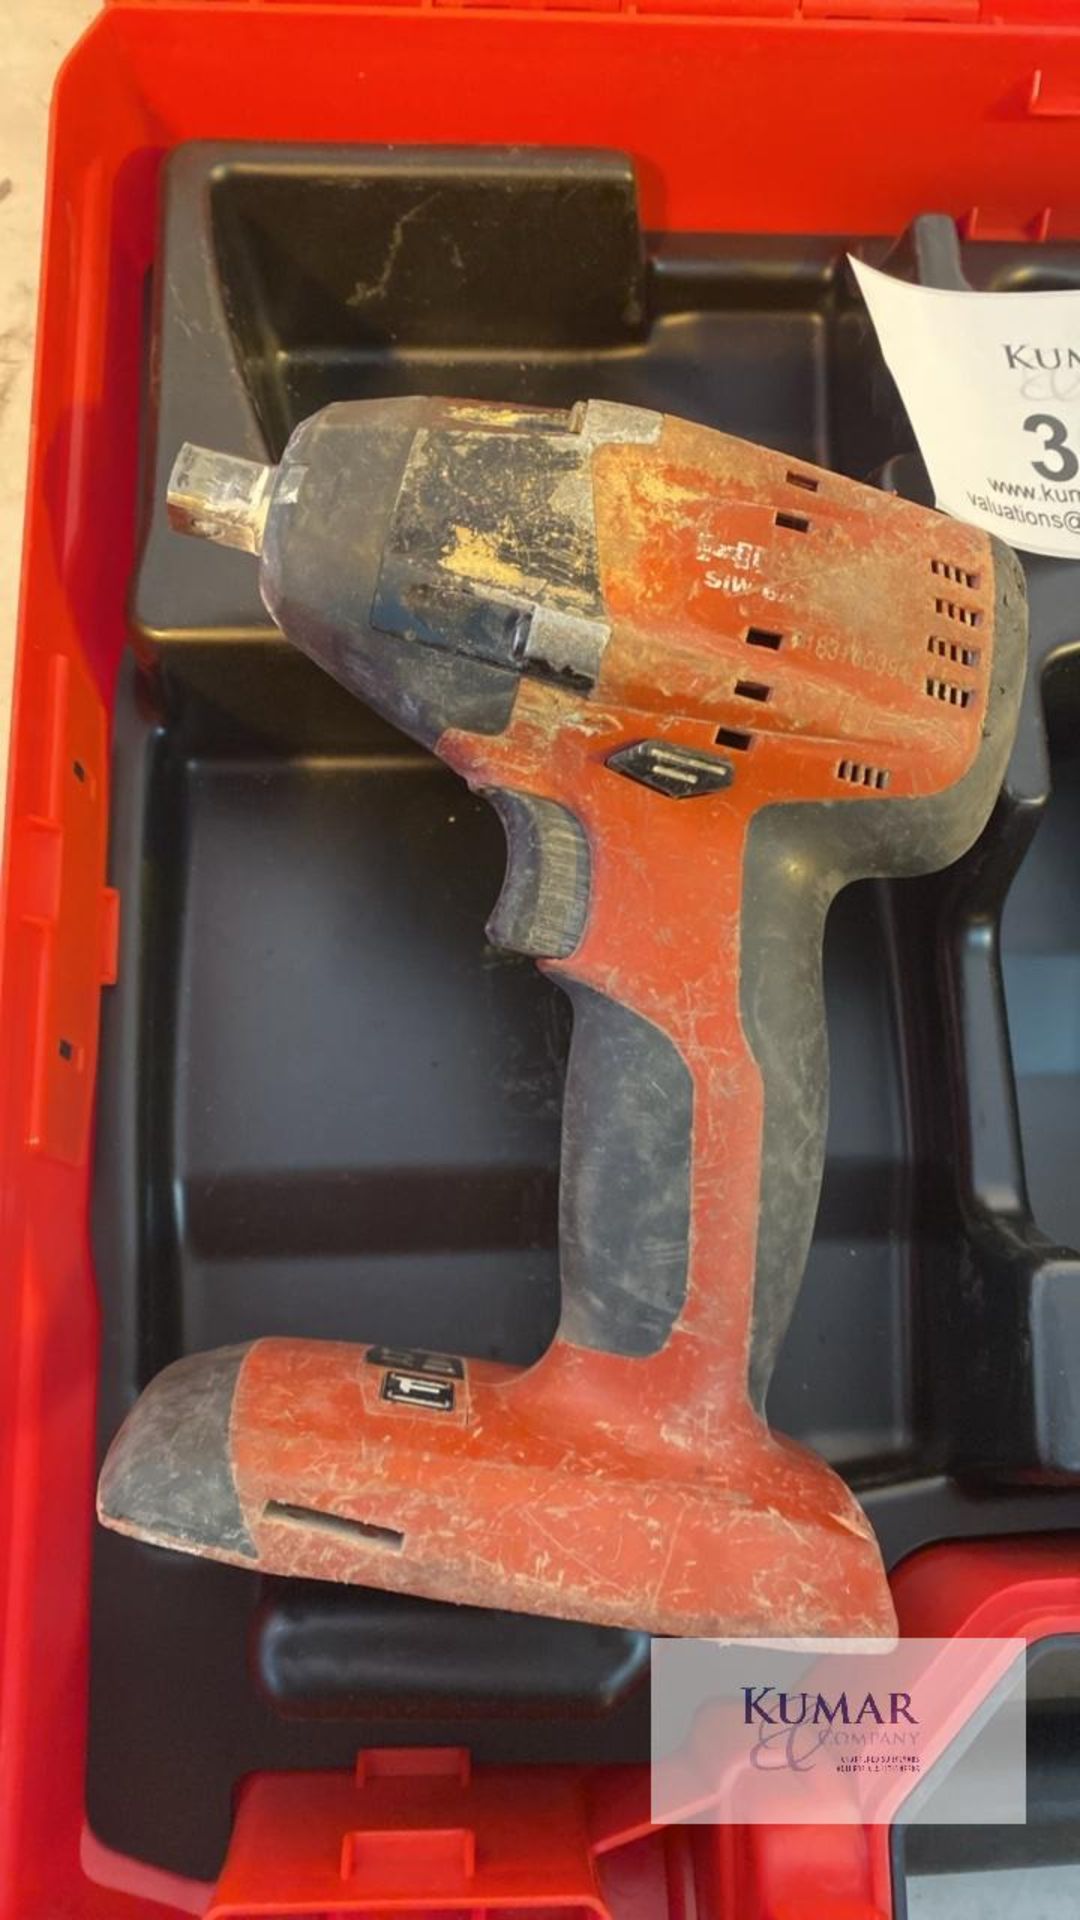 Hilti 1/2" Impact Gun (no battery) in Carry Case - Image 3 of 5